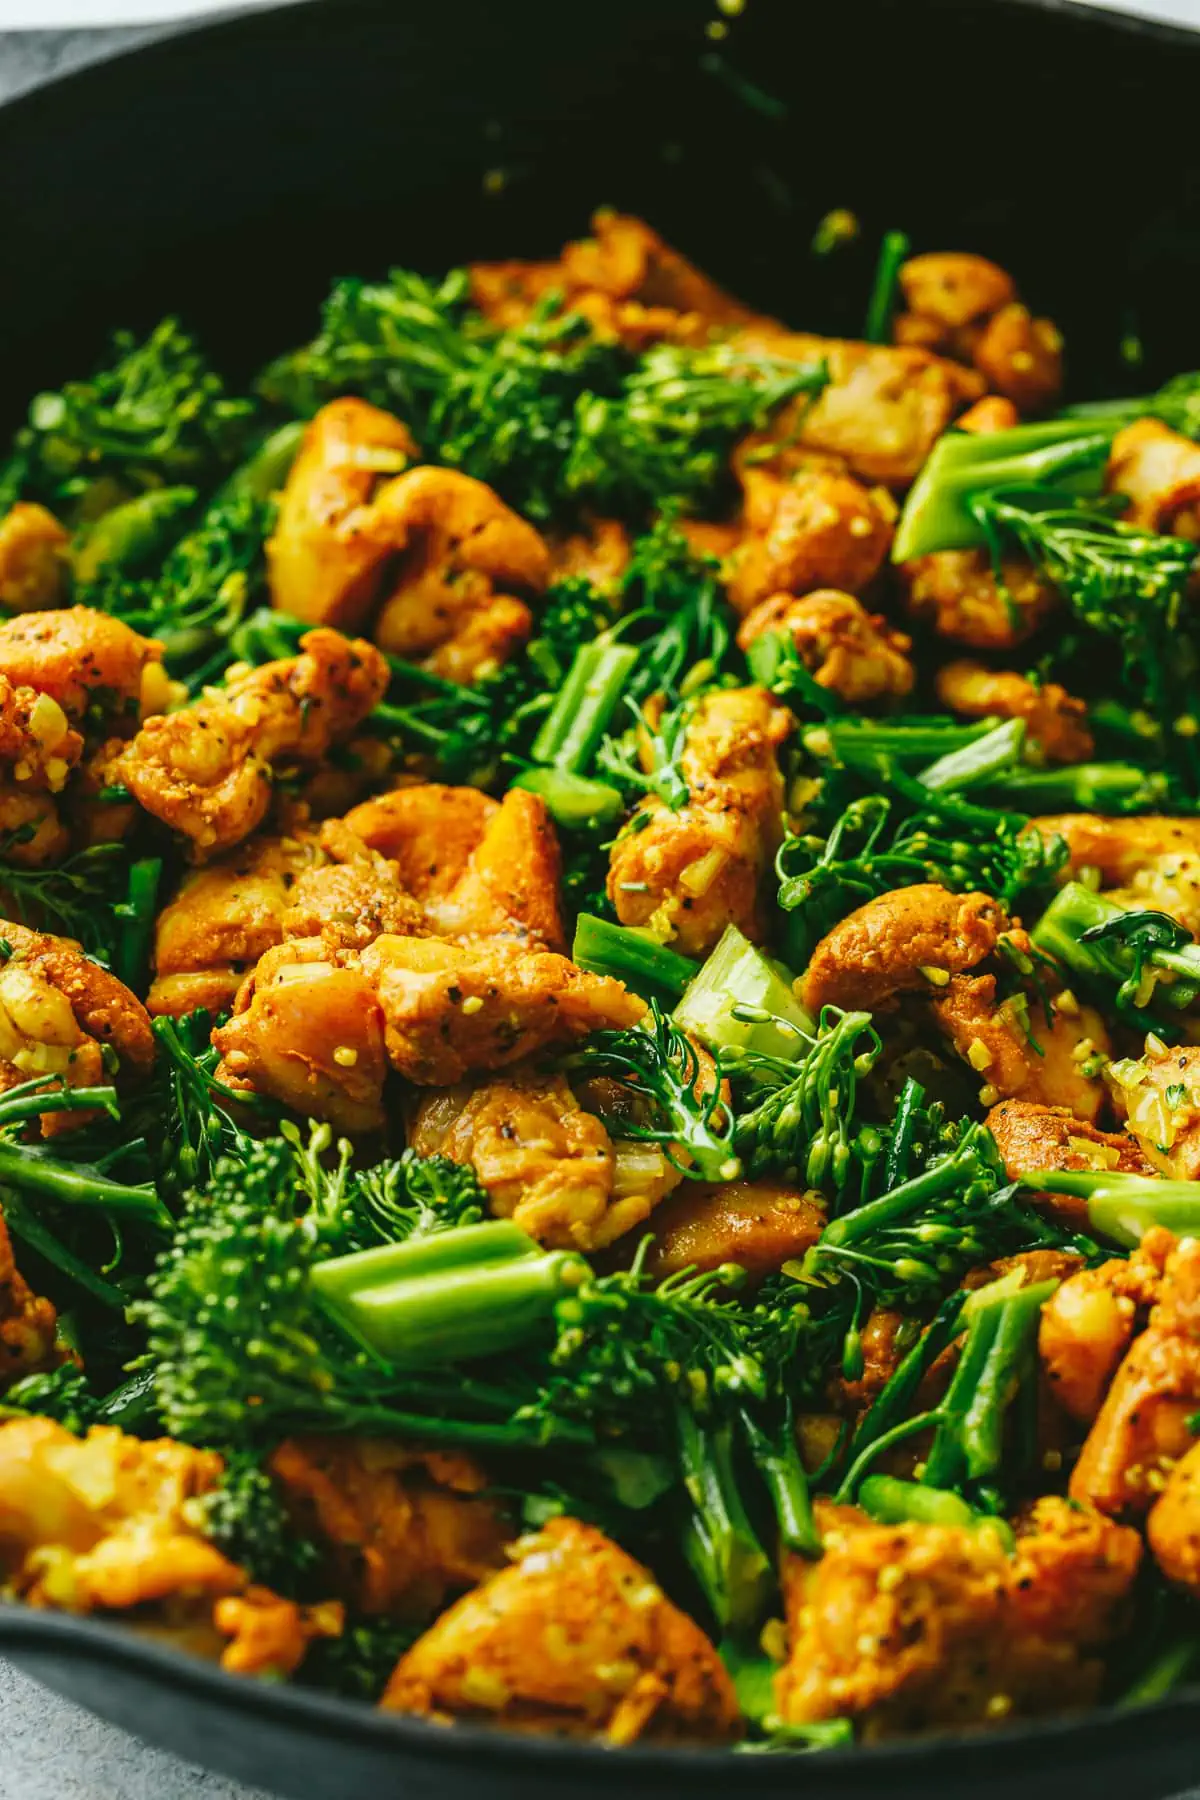 Broccolini and chicken in a skillet.